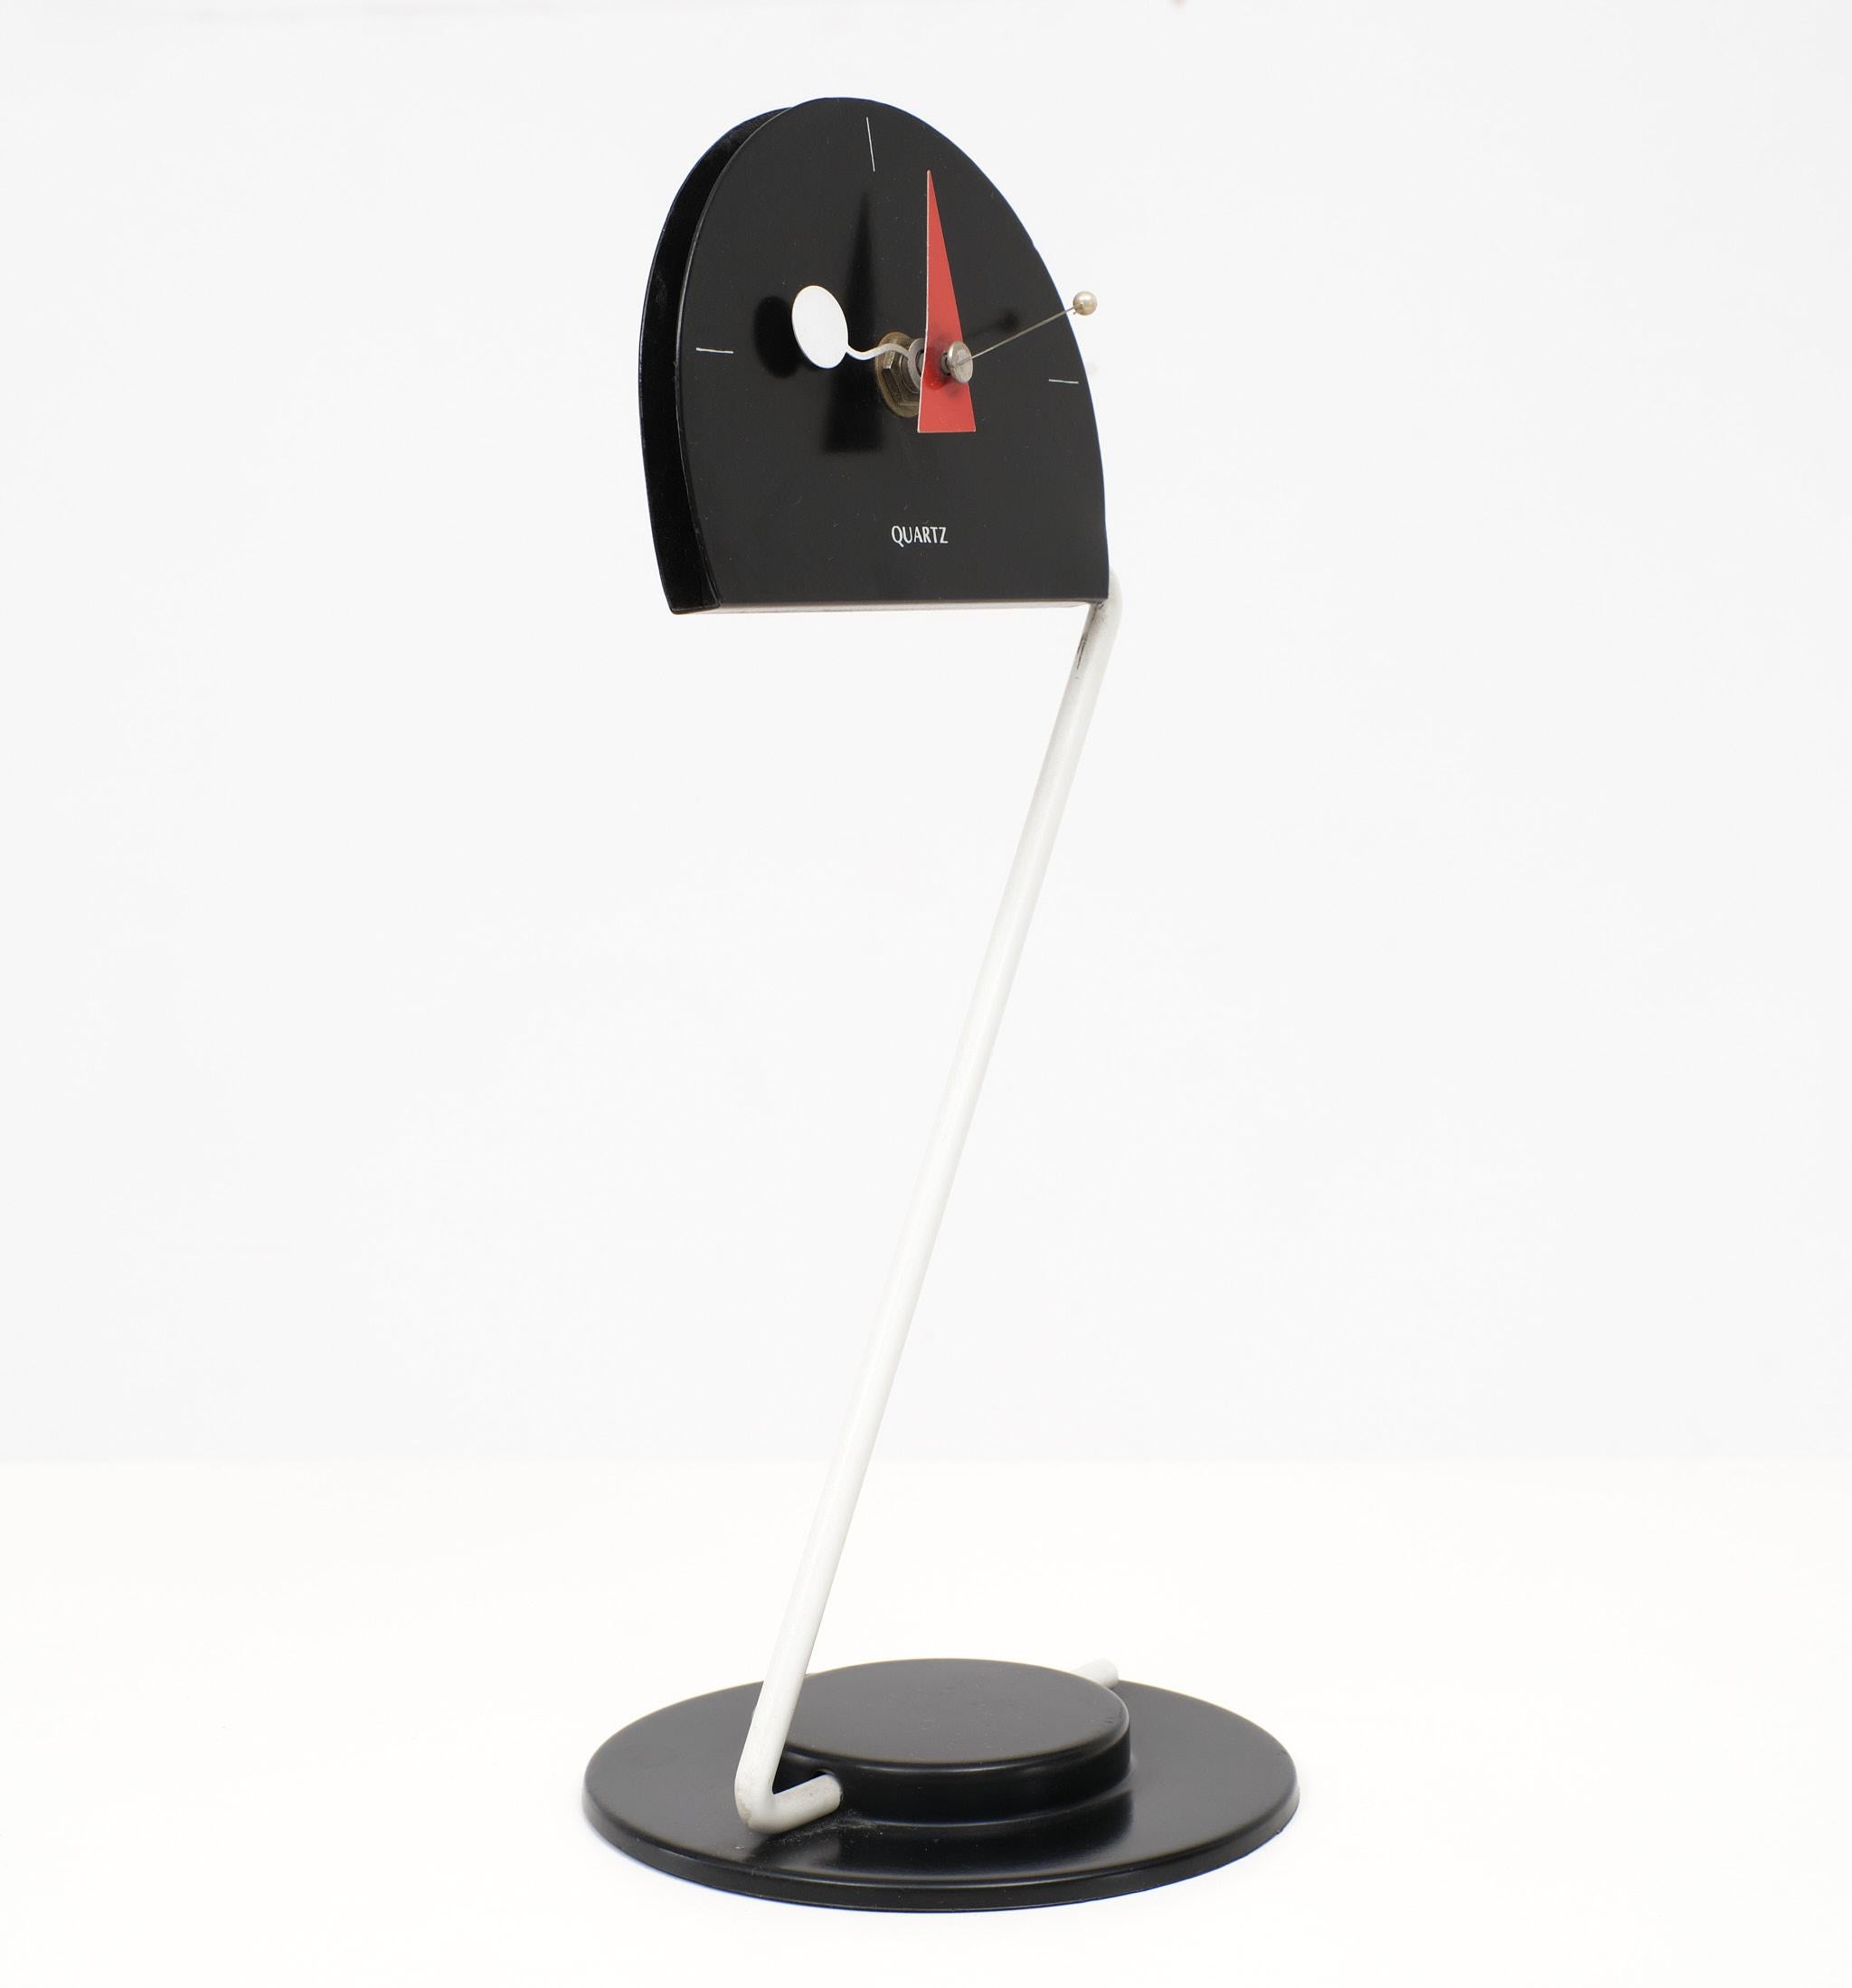 Rare Postmodern Constructivist Geometric Artec Collector's Collection Clock by Canetti, USA, 1980s.
Postmodern Clock, ArTime Collection, by Canetti, Inc, 1980s
This clock has a unique movement that is emphasized by the geometric shape and the